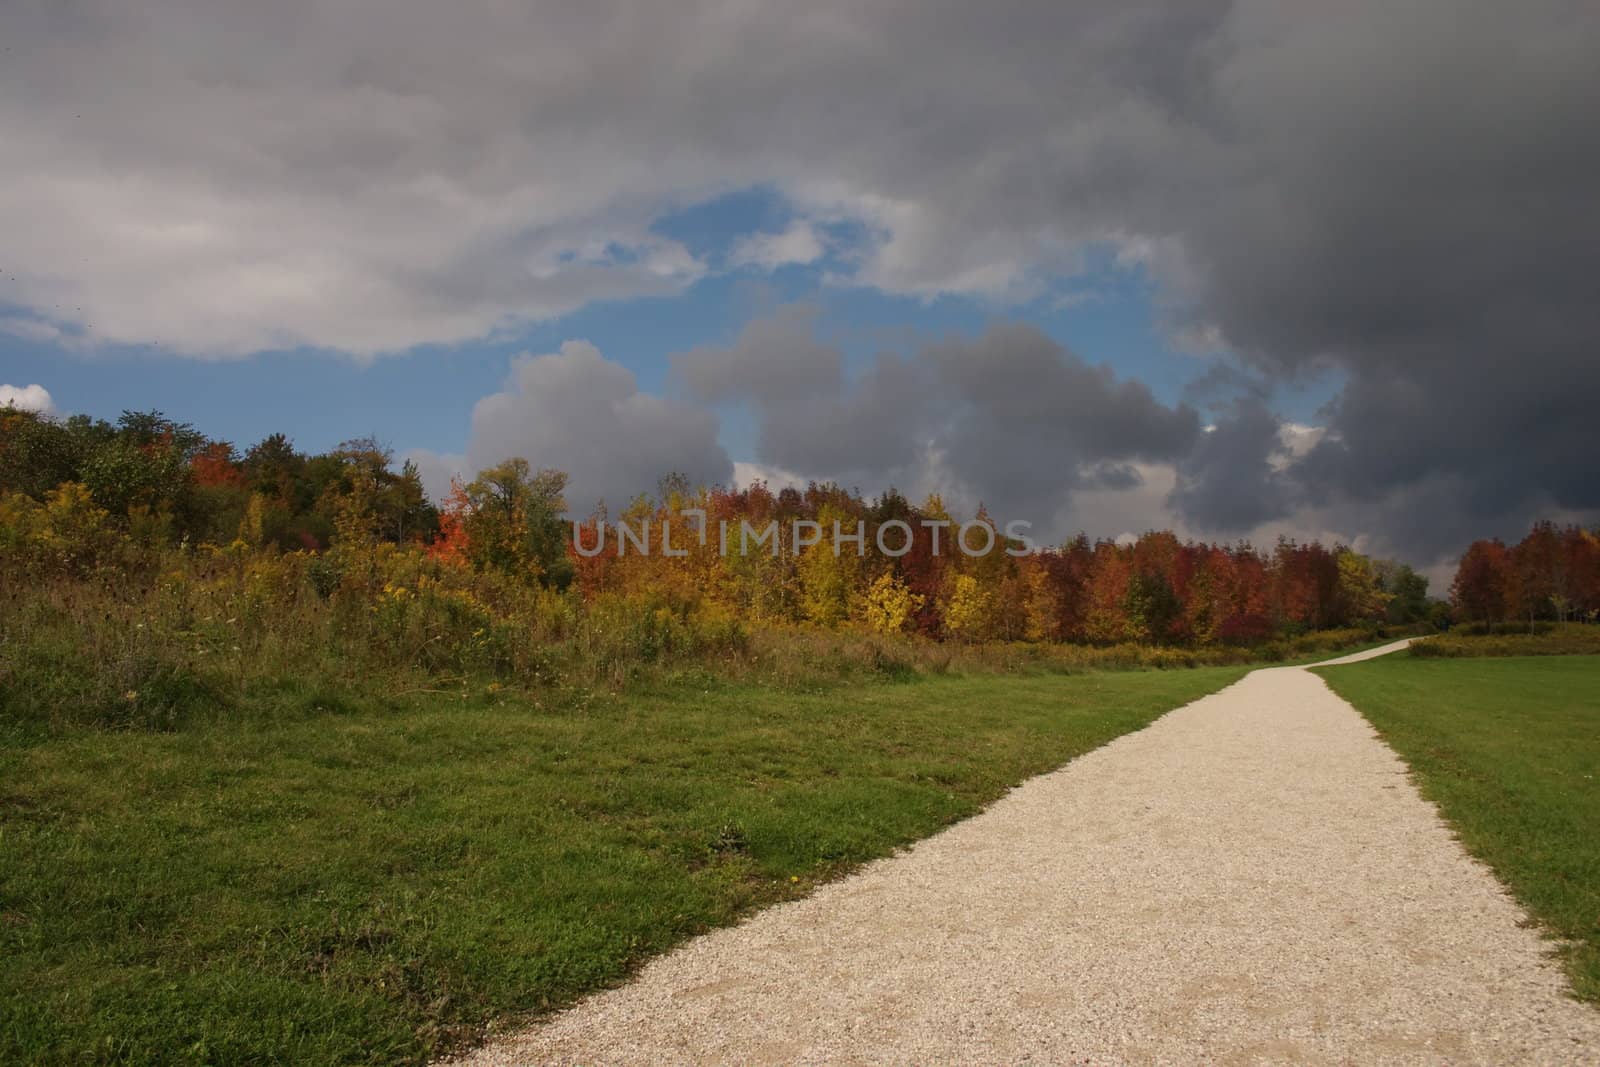 Fall colors along a walking path, with a moody sky.